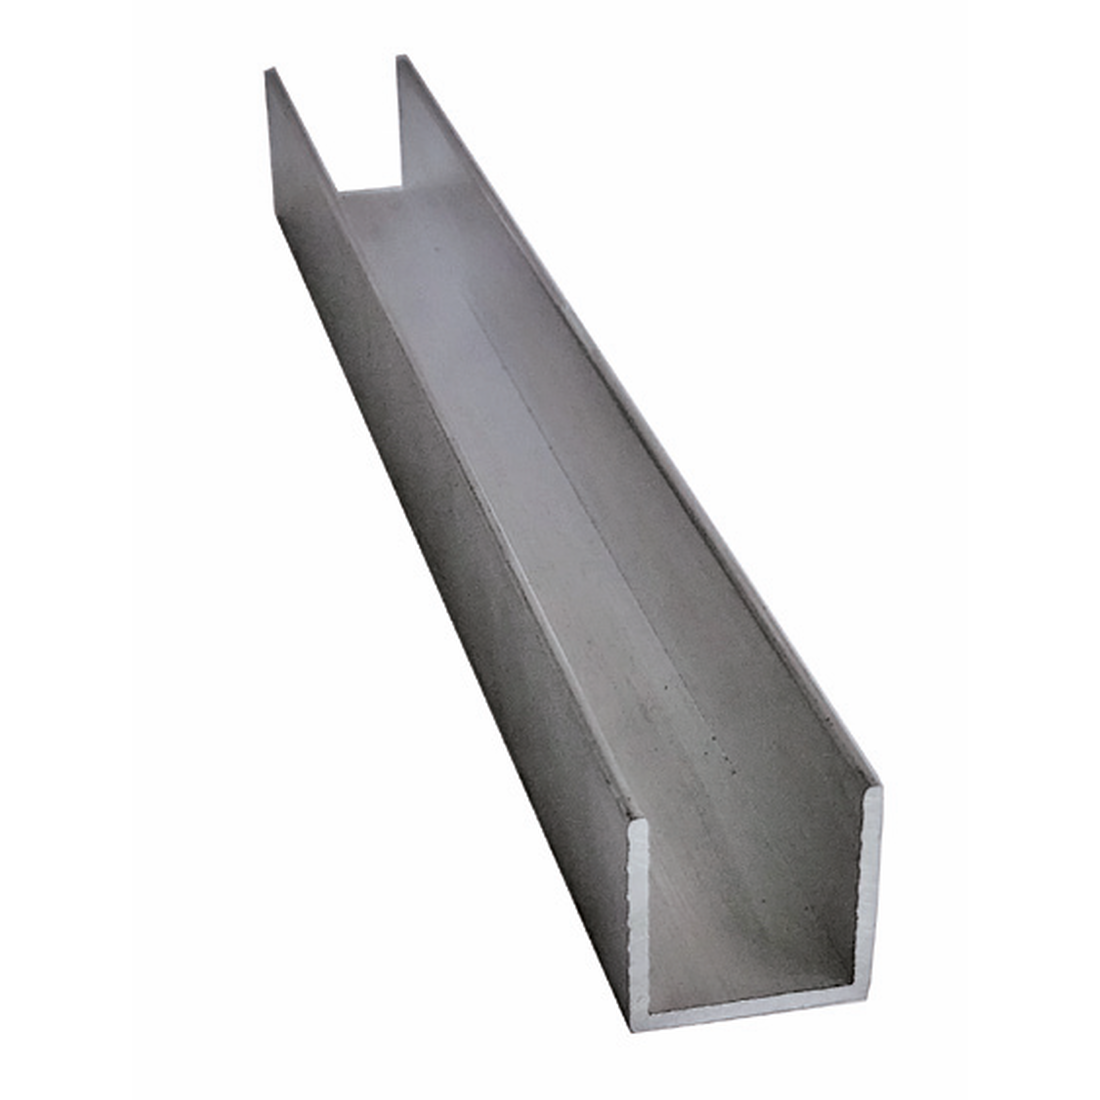 Profile for fixed glazing 15x15x15x2mm